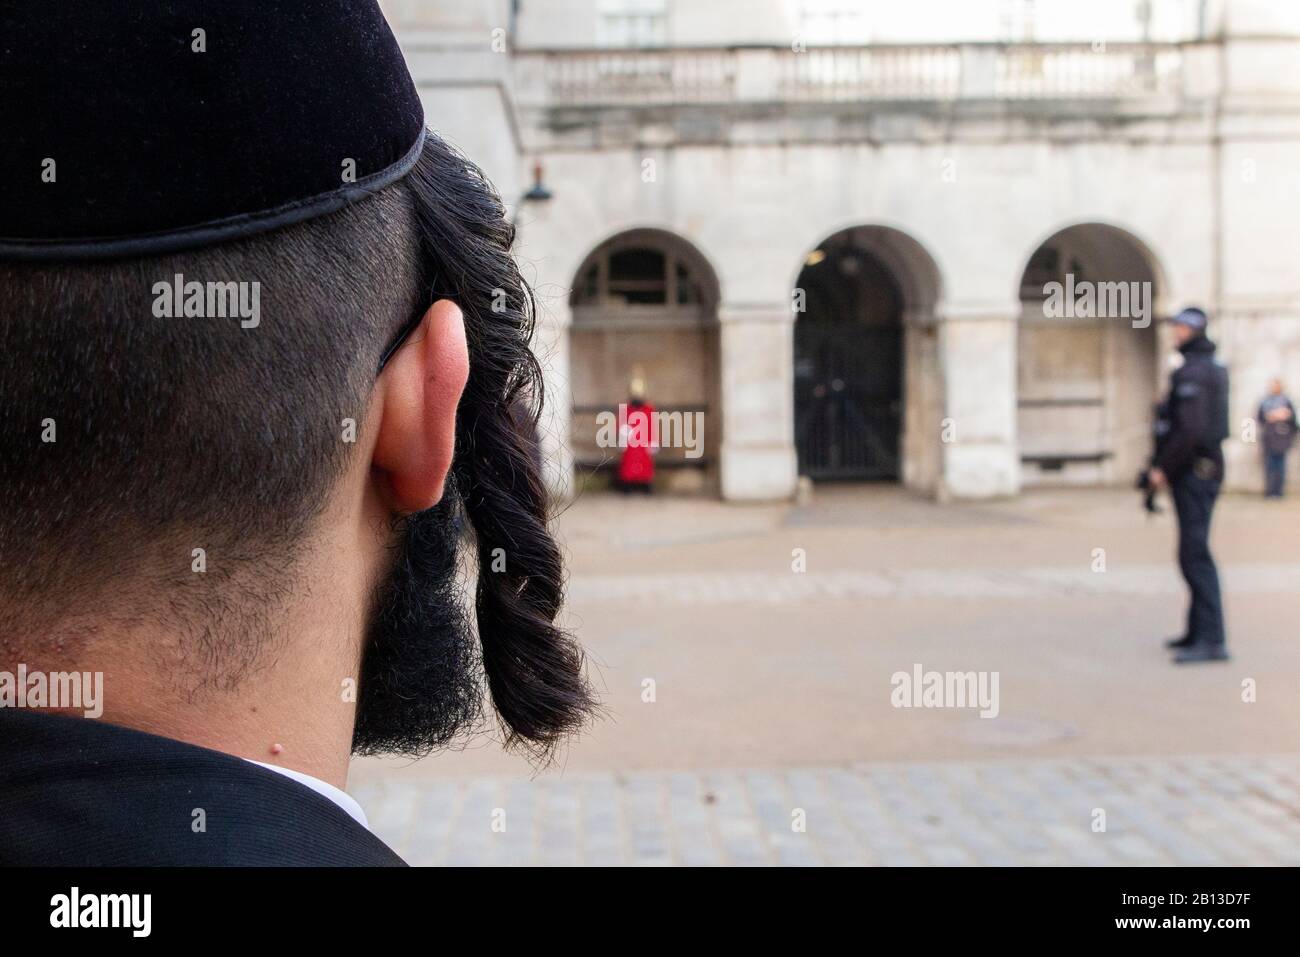 A hasidic jew admires a guard on parade in Horseguard's Parade Stock Photo